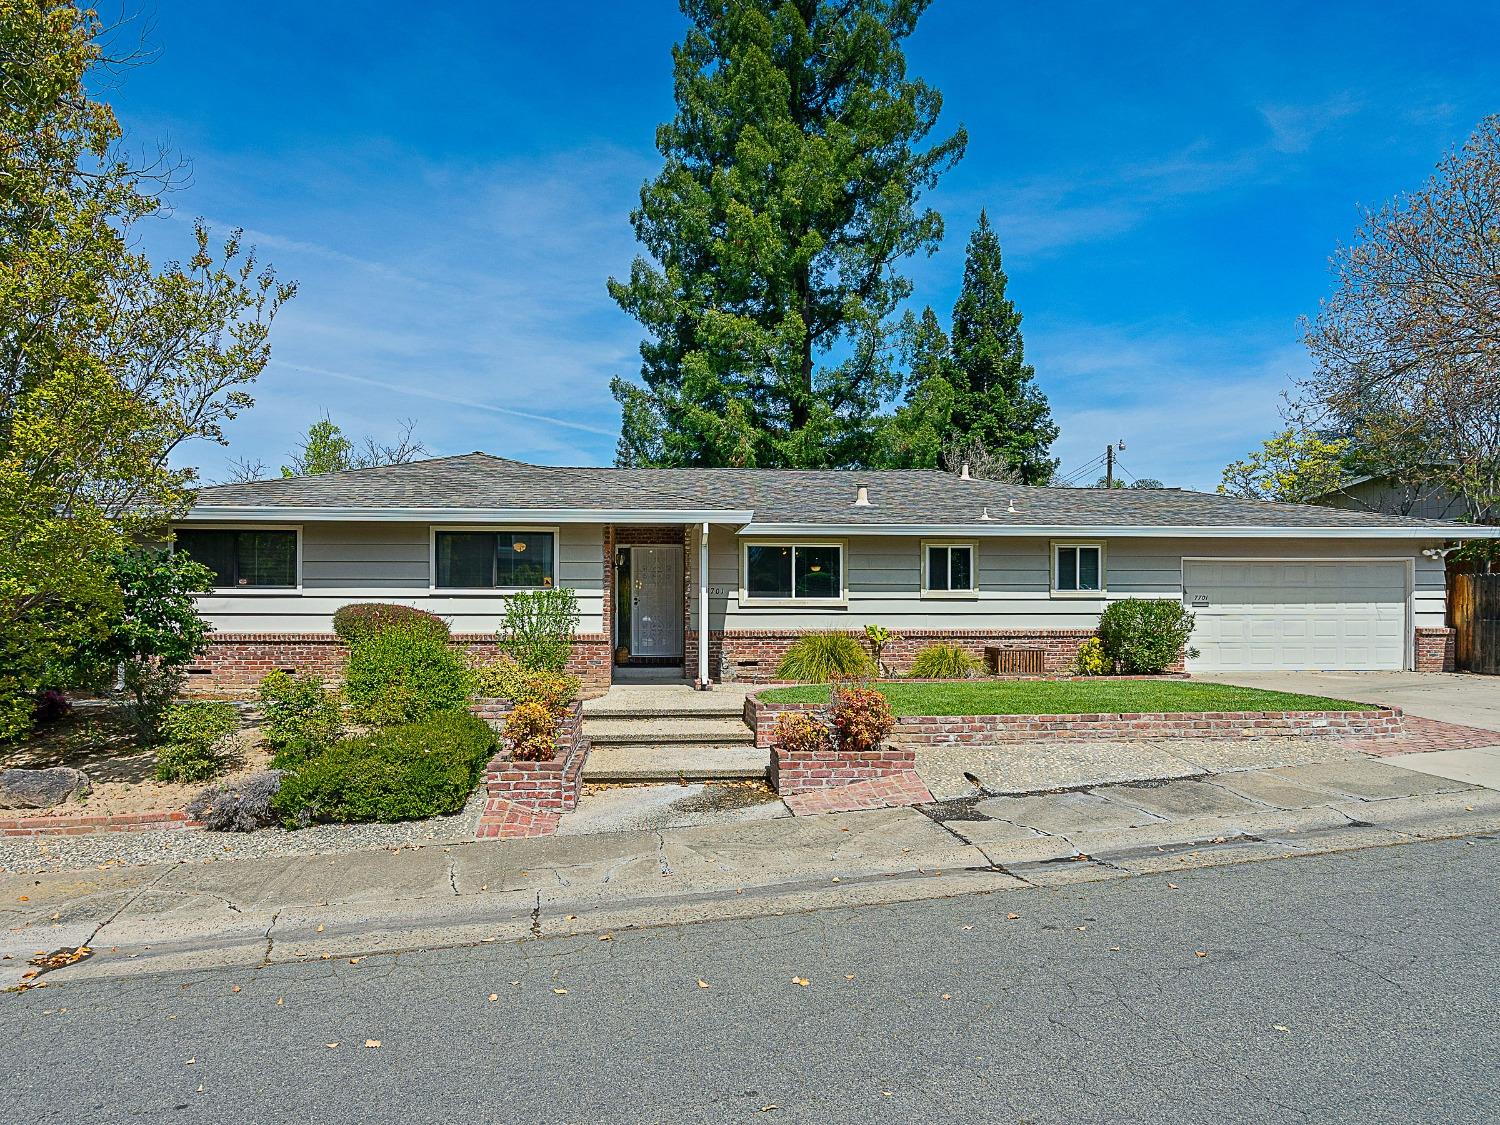 Photo of 7701 Bloom Wy in Citrus Heights, CA